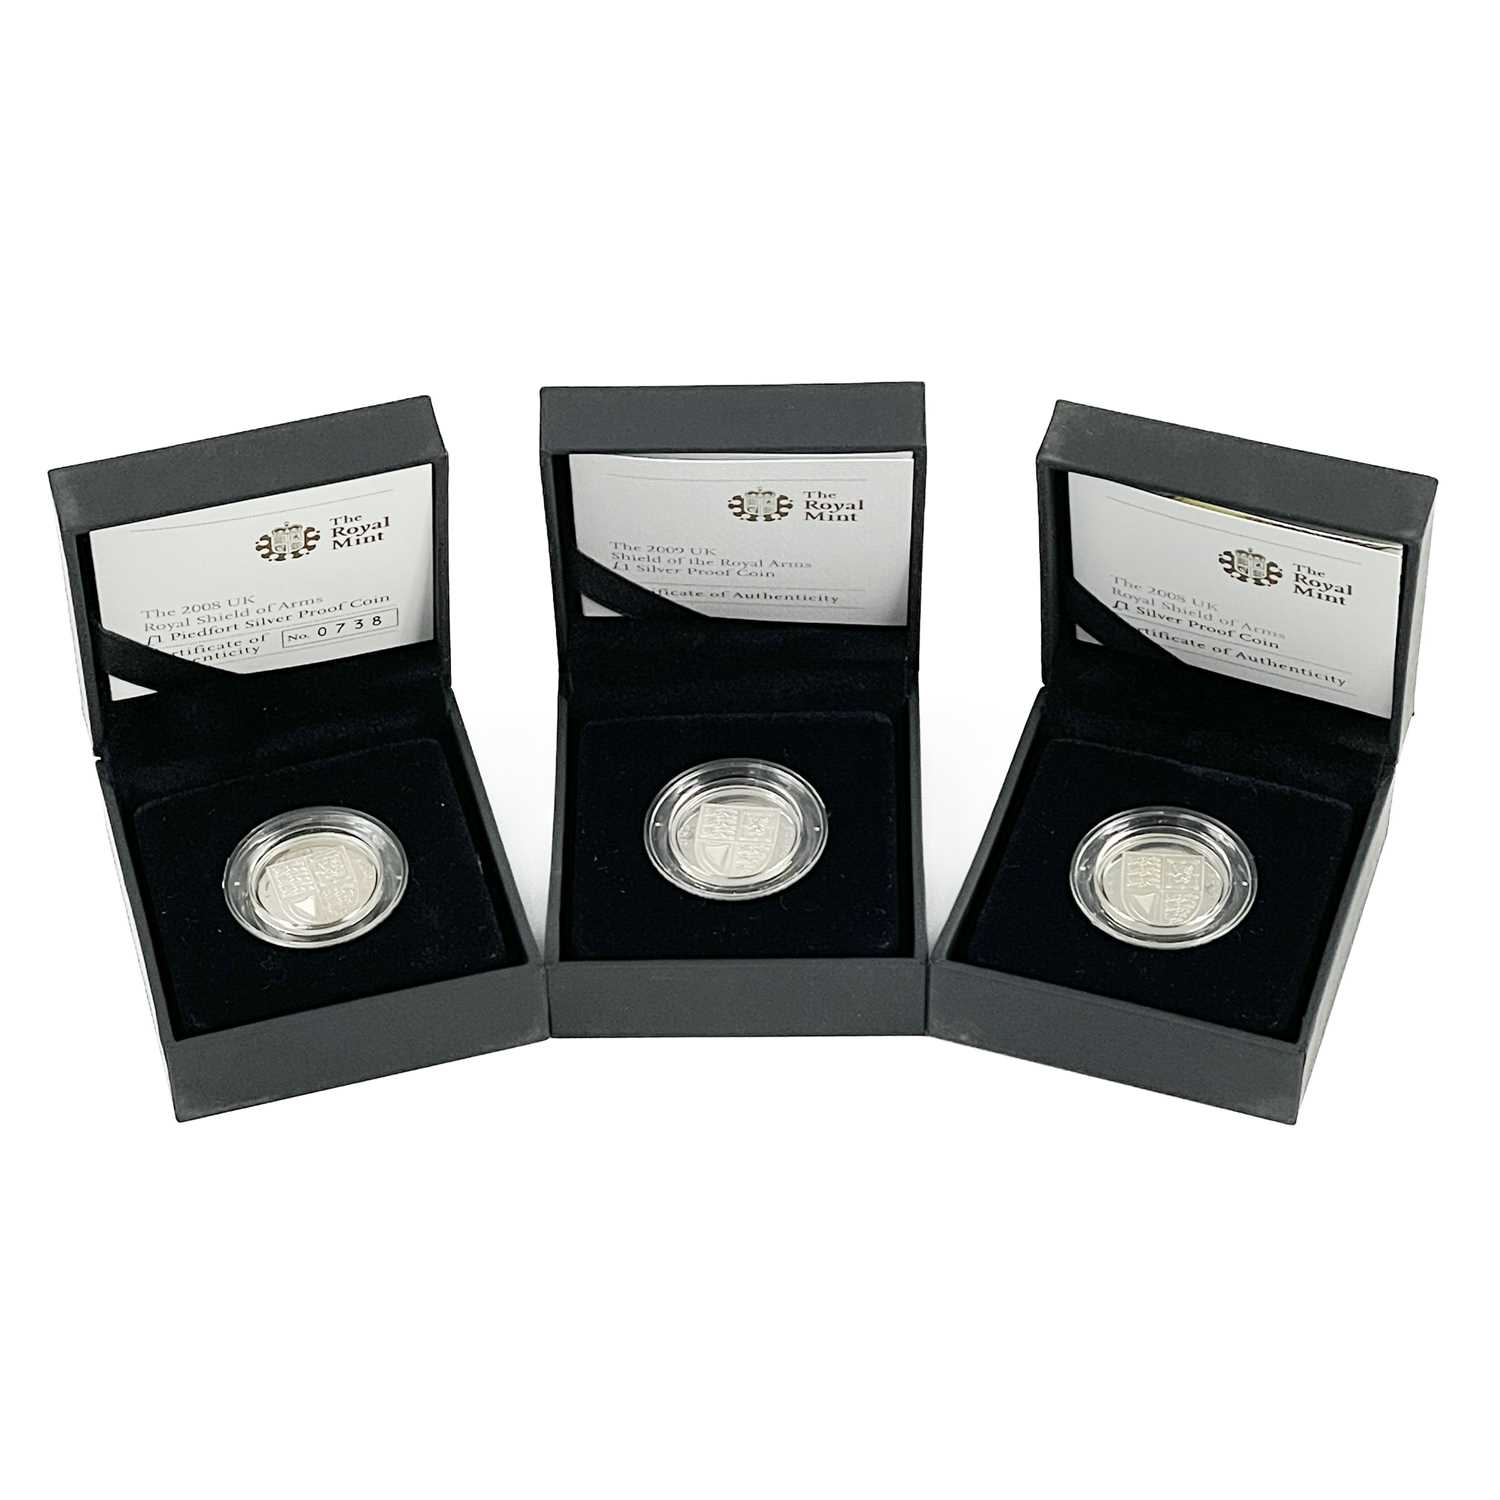 UK Silver Proof £1 Coins 2006 to 2009 (8 coins) in Royal Mint Coin Cases. - Image 4 of 8